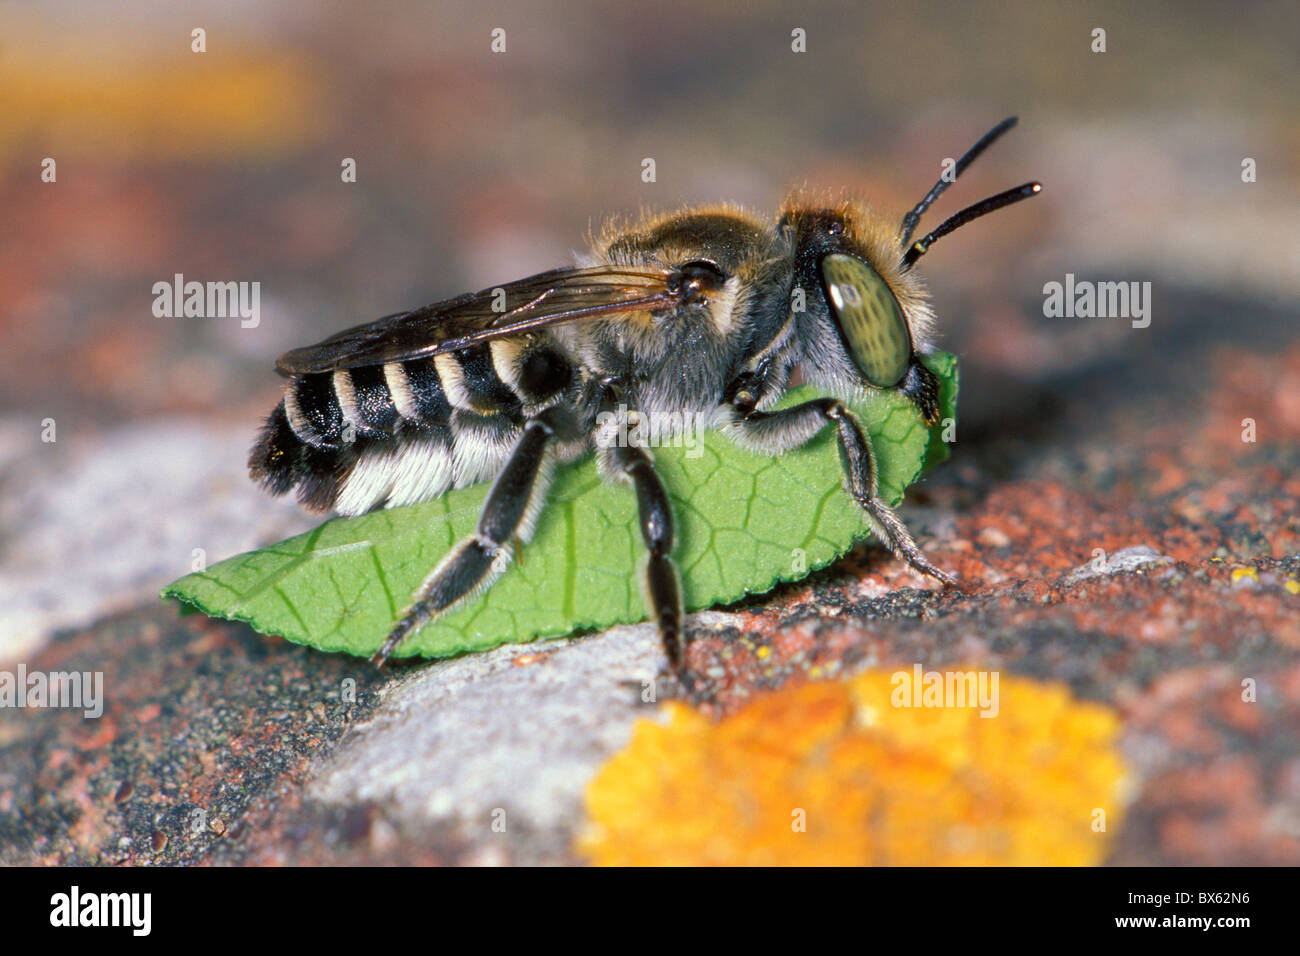 Leaf-cutter Bee (Megachile sp.) Carrying a leaf to nest Stock Photo